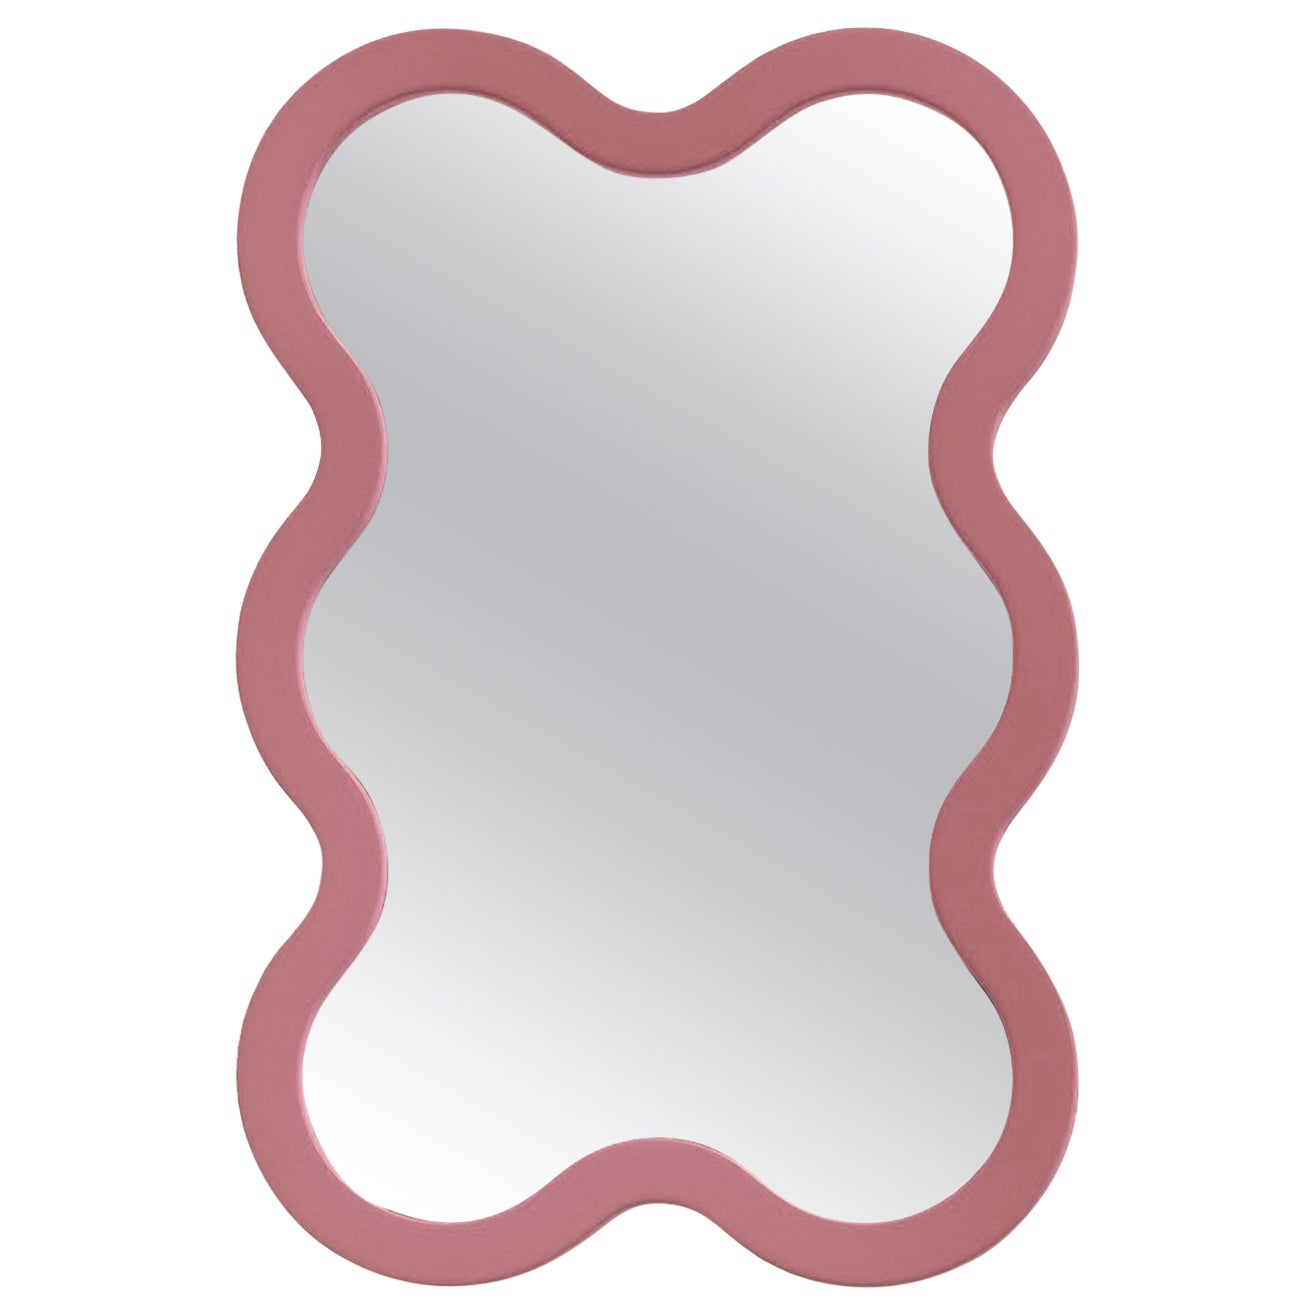 Custom Size Wall Mirror 'Hvyli 6' by Oitoproducts, Pink Frame (40.35''x20.27'') For Sale